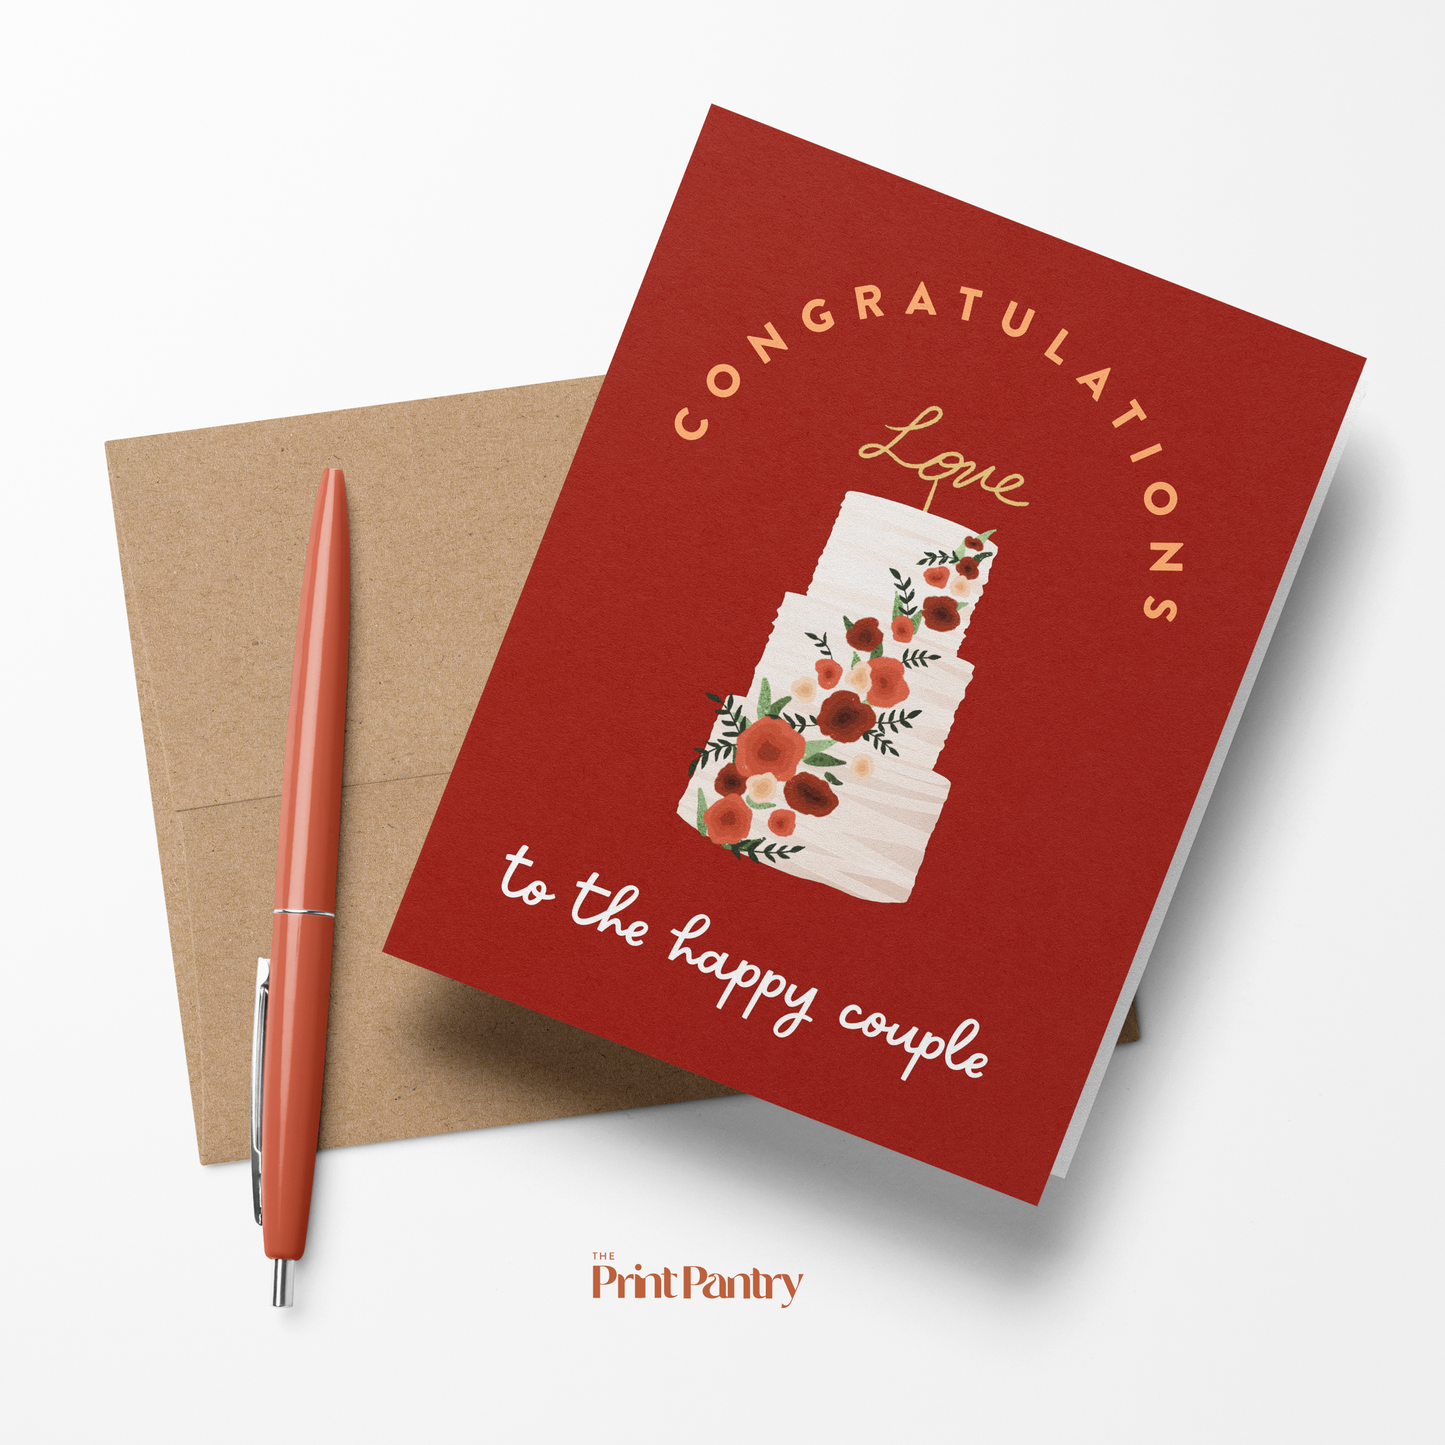 Congratulations to the Happy Couple Card